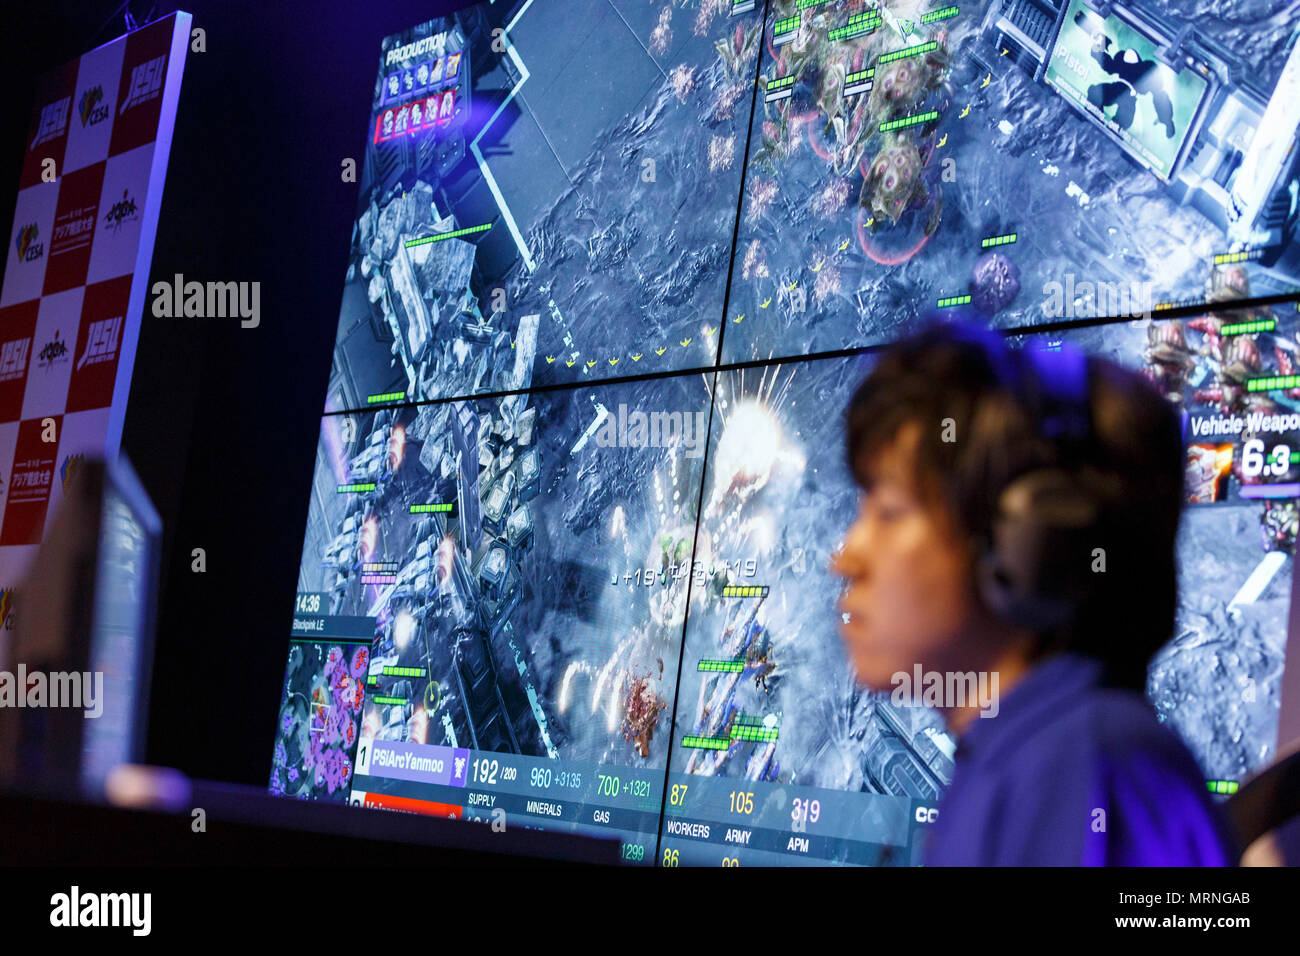 Tokyo, Japan. 27th May, 2018. eSports player Vaisravana competes against PSiArc in the StarCraft II video game during the eSports Asian Games Japan Qualifying at LFS Ikebukuro eSports Arena on May 27, 2018, Tokyo, Japan. The event organized by Japan eSports Union (JESU) had players to competing to represent Japan in the 18th Asian Games Jakarta-Palembang 2018, which will be held in Indonesia in August. Credit: Rodrigo Reyes Marin/AFLO/Alamy Live News Credit: Aflo Co. Ltd./Alamy Live News Stock Photo